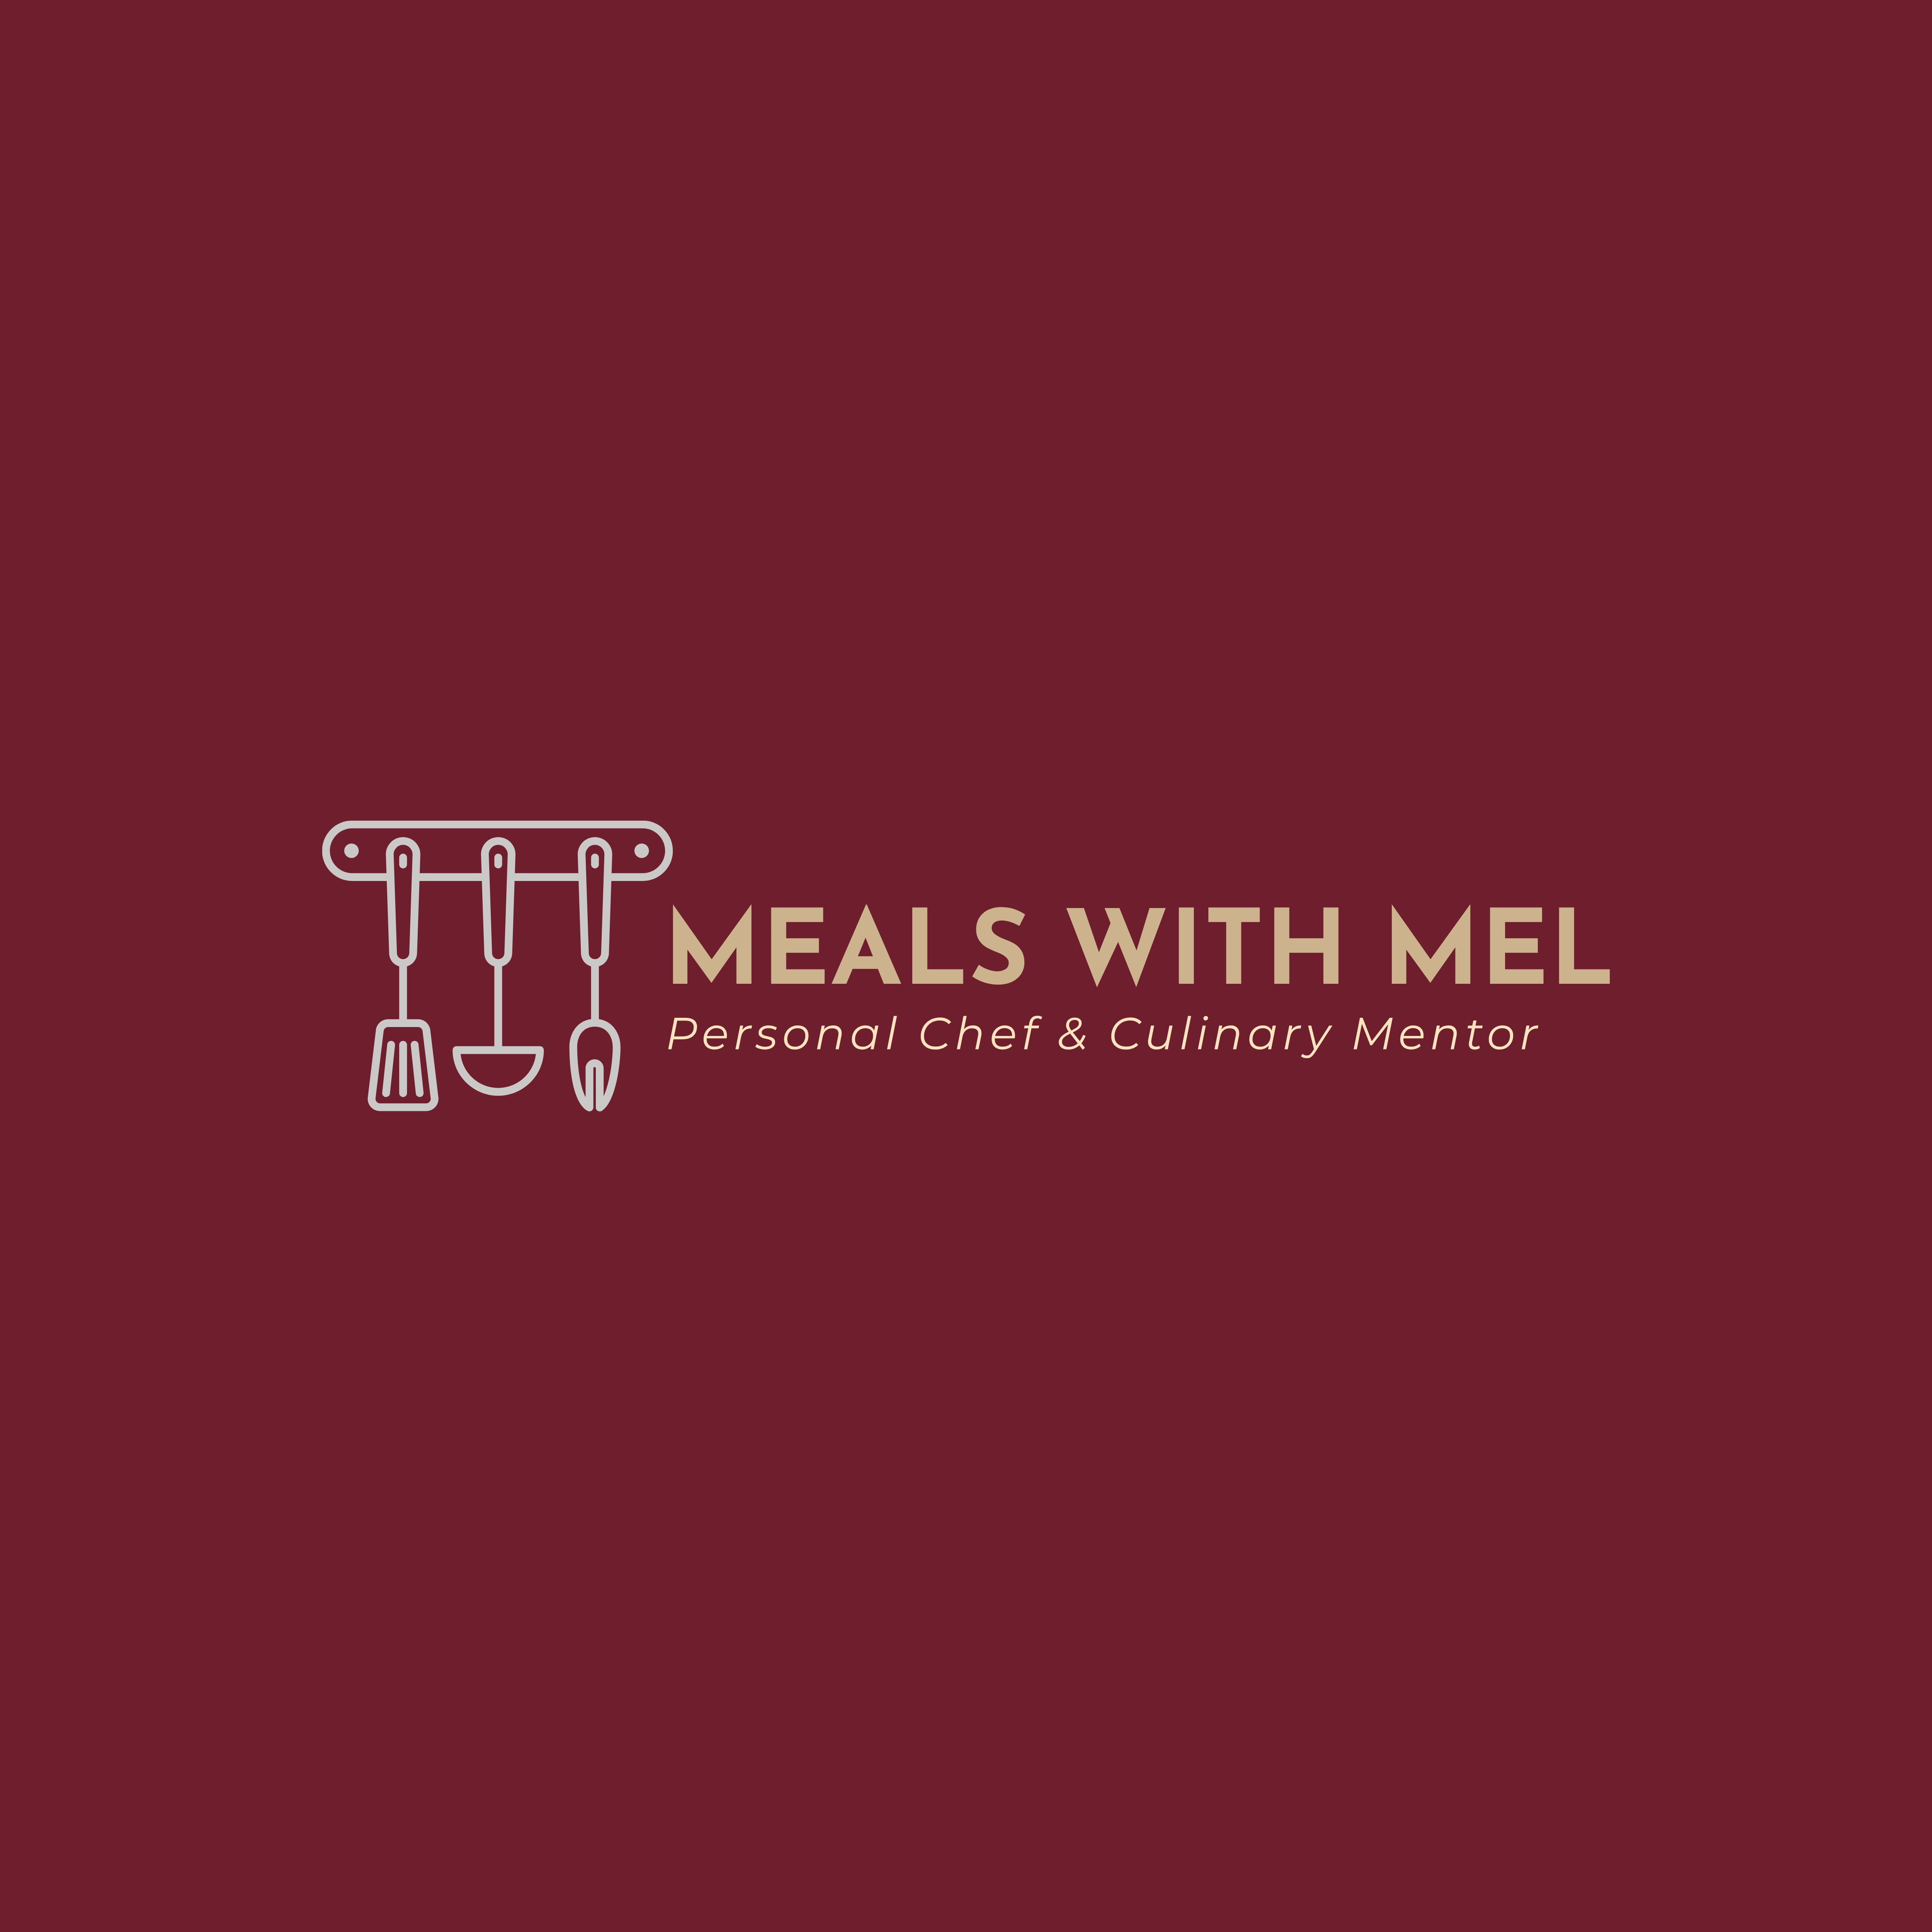 Meals with Mel Logo